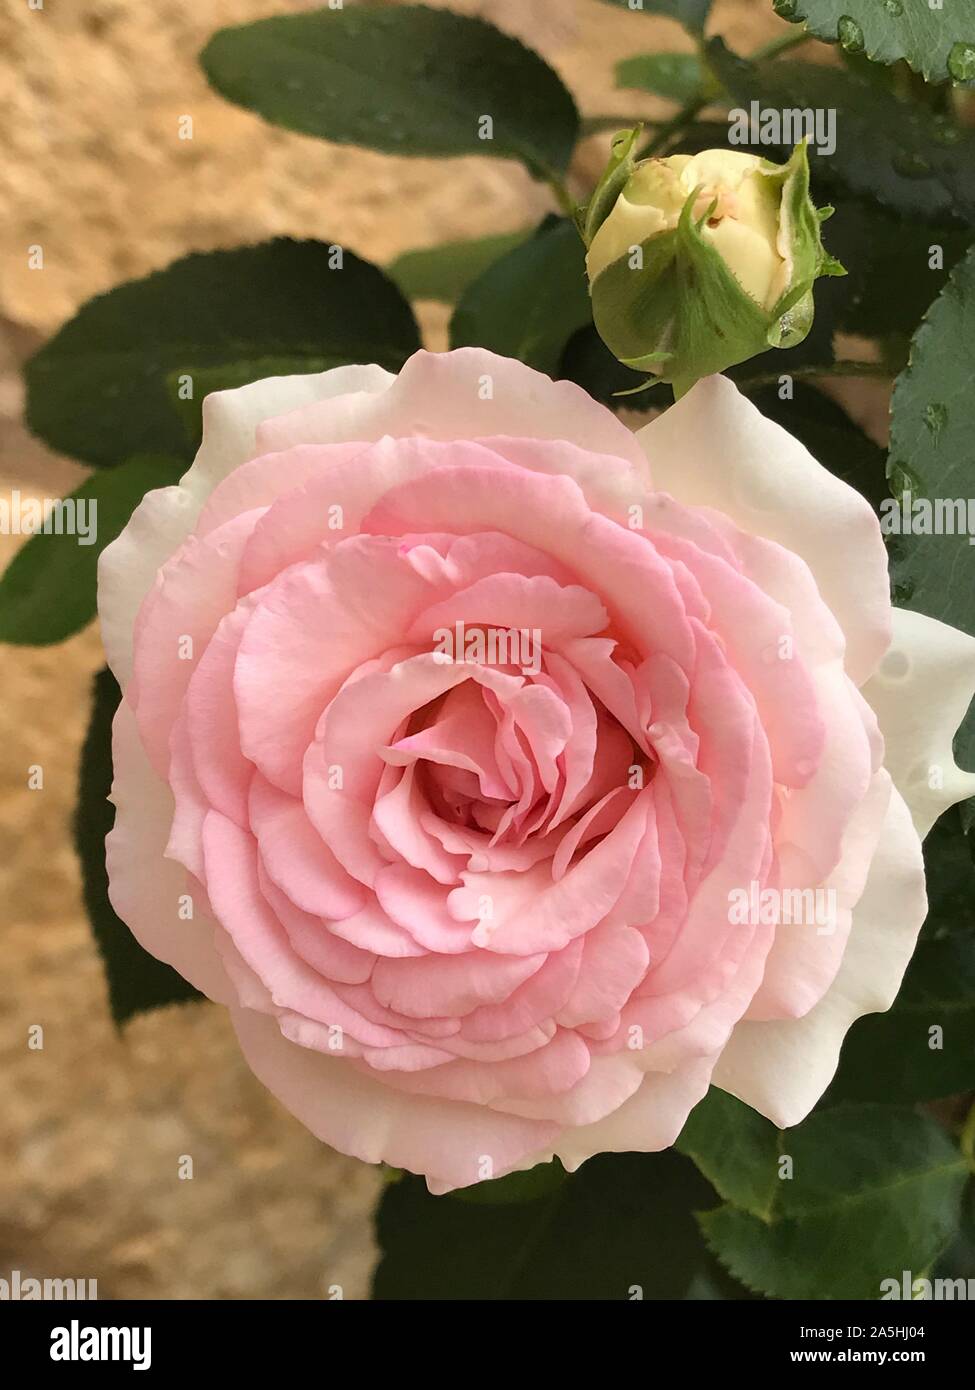 White and pink rose Stock Photo